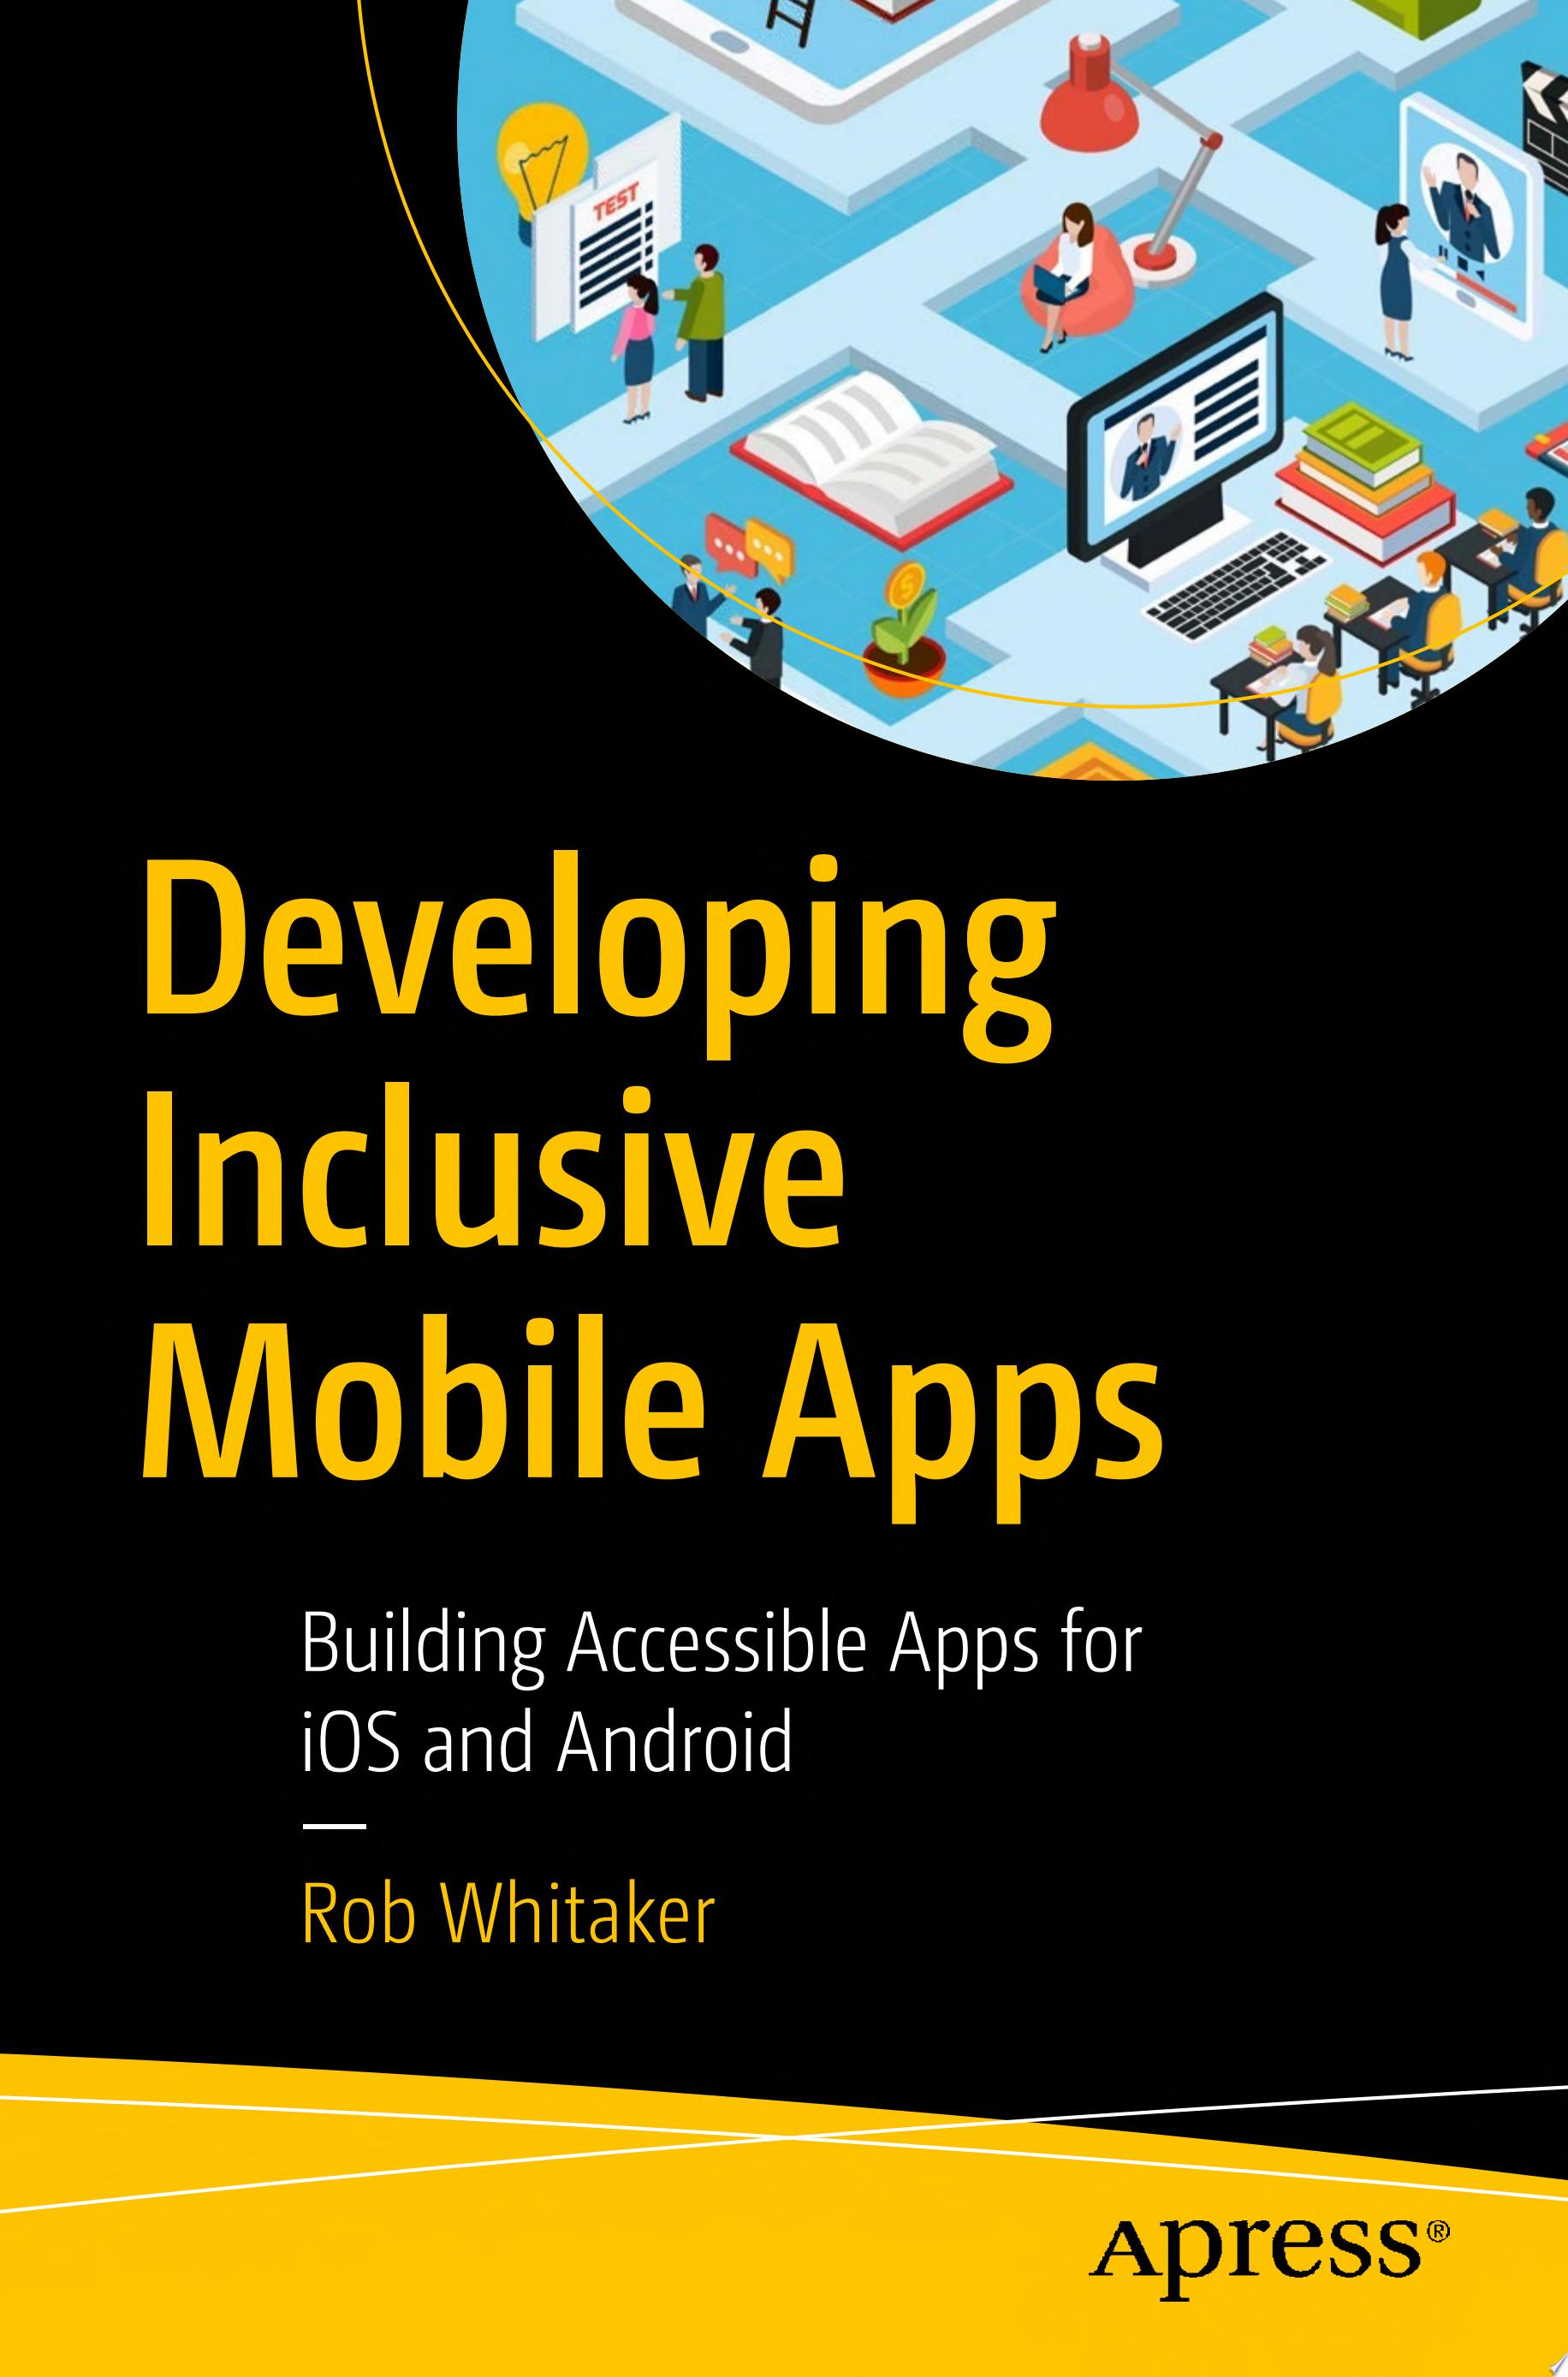 Image for "Developing Inclusive Mobile Apps"